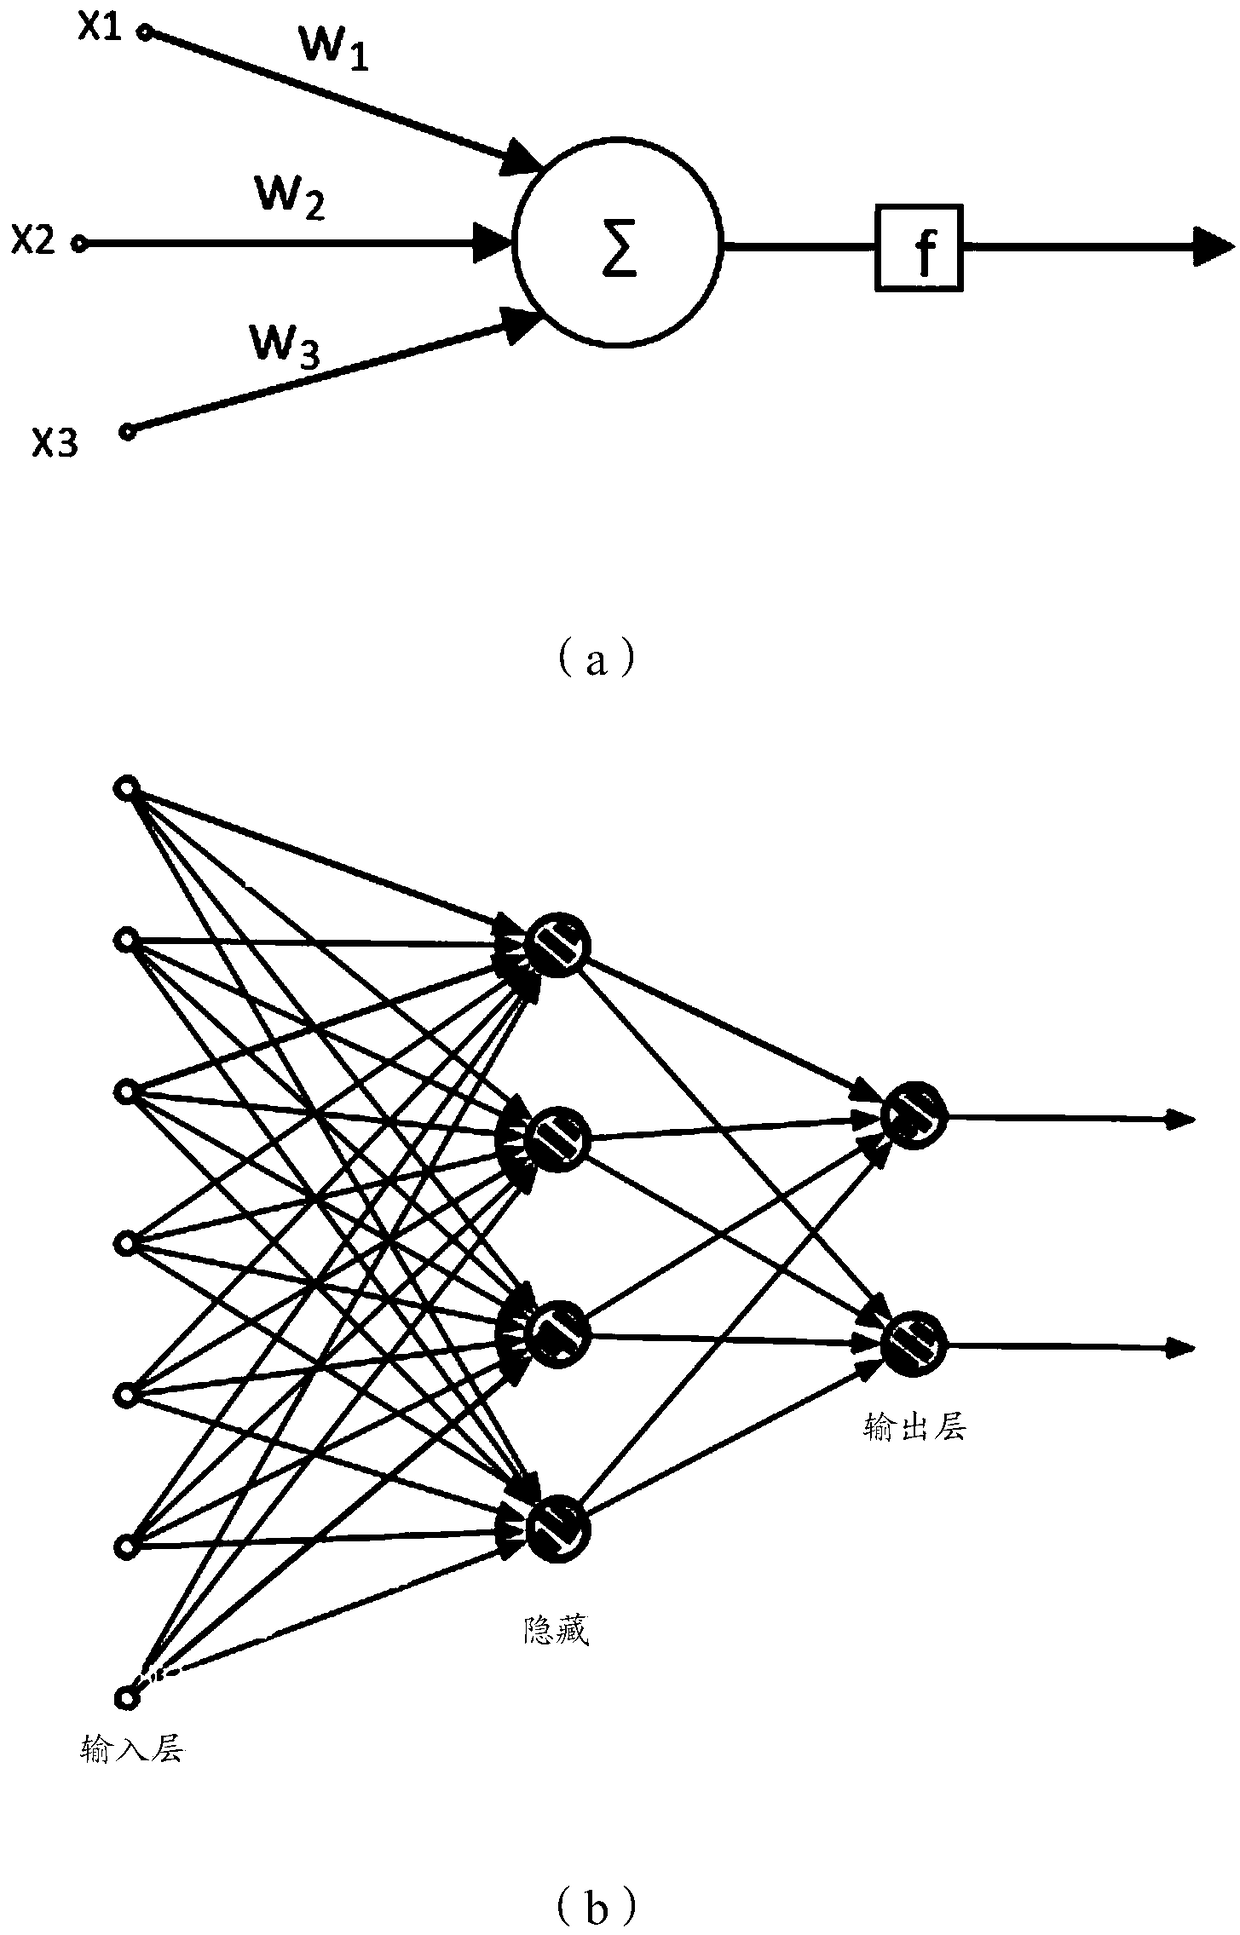 An optical neuron structure and a neural network processing system including the structure